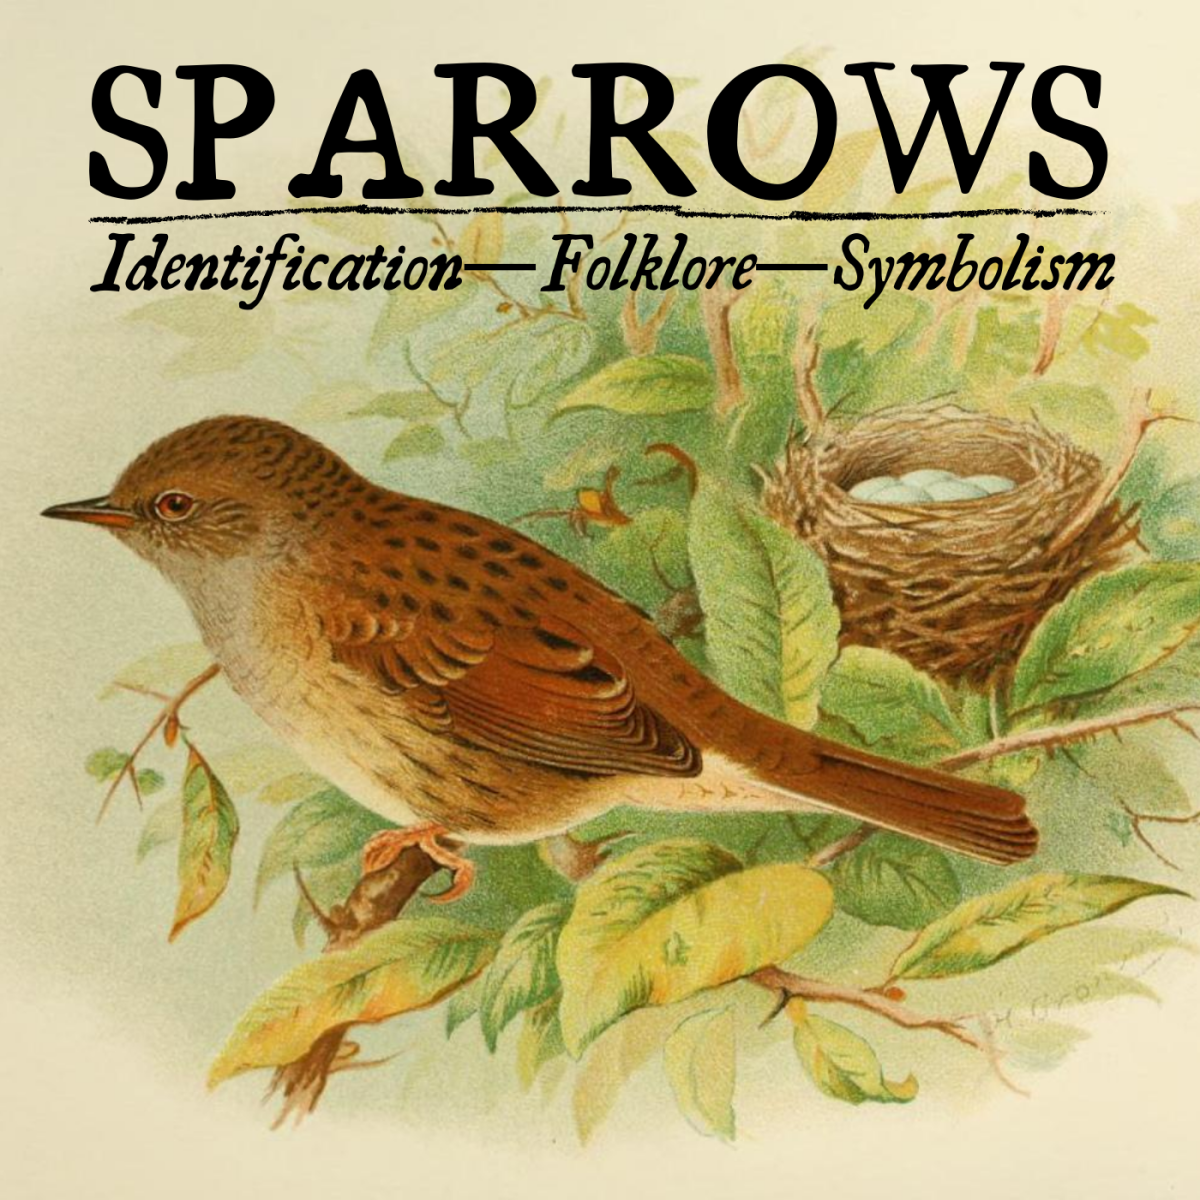 What does the Sparrow symbolize in the dog and the Sparrow?